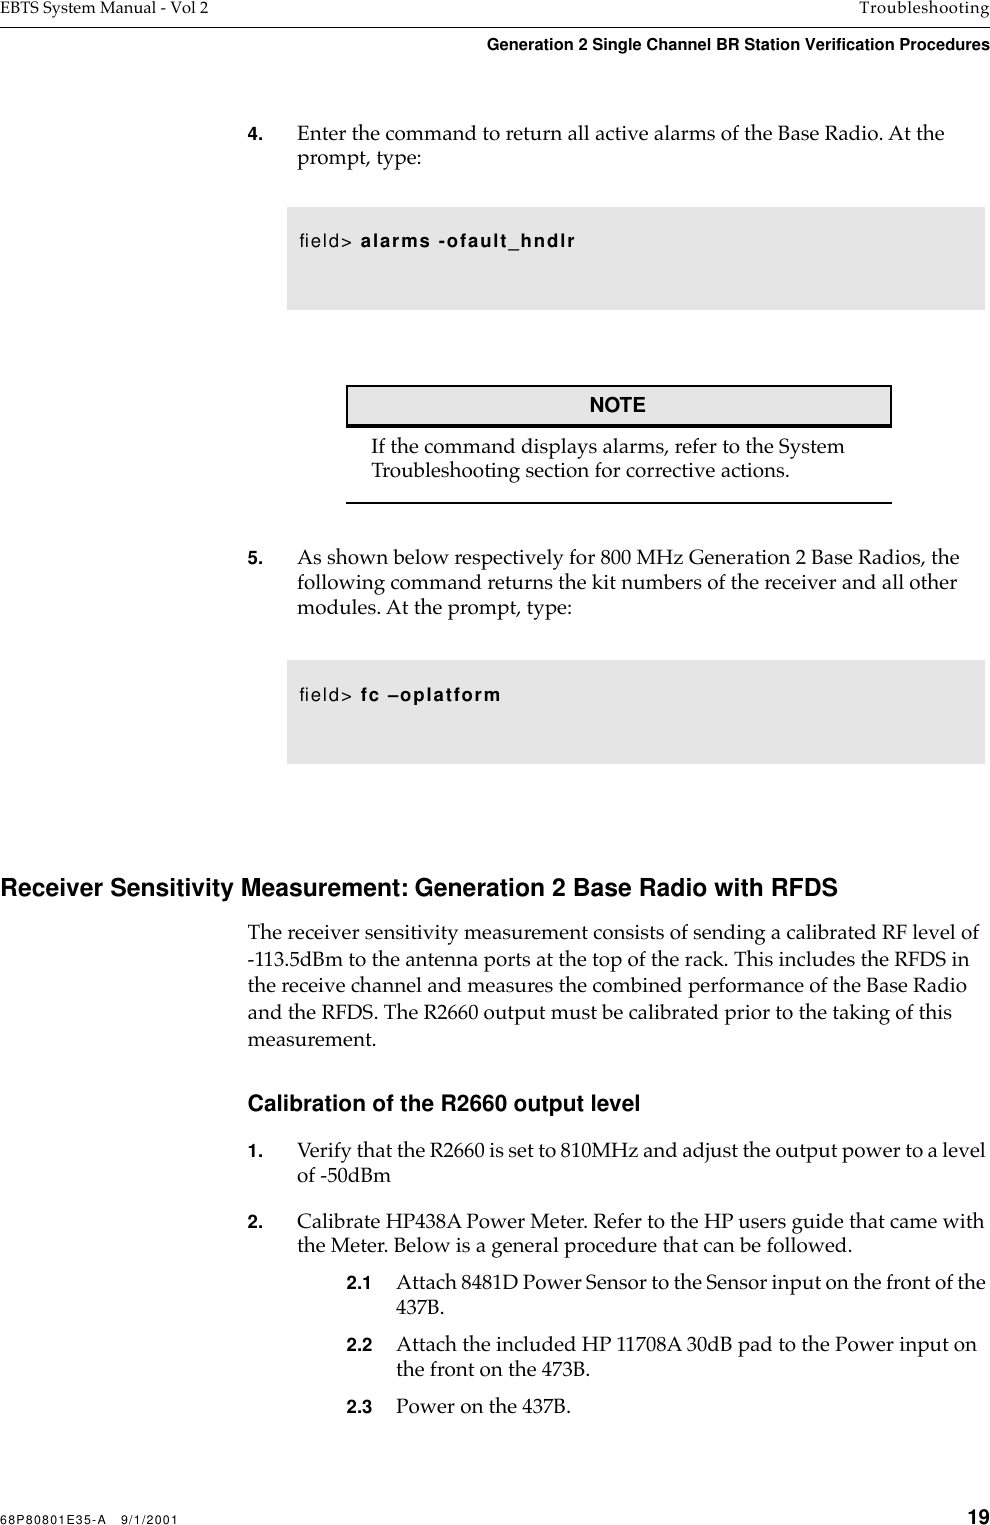 68P80801E35-A   9/1/2001 19EBTS System Manual - Vol 2 TroubleshootingGeneration 2 Single Channel BR Station Verification Procedures 4. Enter the command to return all active alarms of the Base Radio. At the prompt, type: NOTEIf the command displays alarms, refer to the System Troubleshooting section for corrective actions.5. As shown below respectively for 800 MHz Generation 2 Base Radios, the following command returns the kit numbers of the receiver and all other modules. At the prompt, type: Receiver Sensitivity Measurement: Generation 2 Base Radio with RFDSThe receiver sensitivity measurement consists of sending a calibrated RF level of -113.5dBm to the antenna ports at the top of the rack. This includes the RFDS in the receive channel and measures the combined performance of the Base Radio and the RFDS. The R2660 output must be calibrated prior to the taking of this measurement.Calibration of the R2660 output level1. Verify that the R2660 is set to 810MHz and adjust the output power to a level of -50dBm2. Calibrate HP438A Power Meter. Refer to the HP users guide that came with the Meter. Below is a general procedure that can be followed.2.1 Attach 8481D Power Sensor to the Sensor input on the front of the 437B. 2.2 Attach the included HP 11708A 30dB pad to the Power input on the front on the 473B.2.3 Power on the 437B.ﬁeld&gt; alarms -ofault_hndlrﬁeld&gt; fc –oplatform